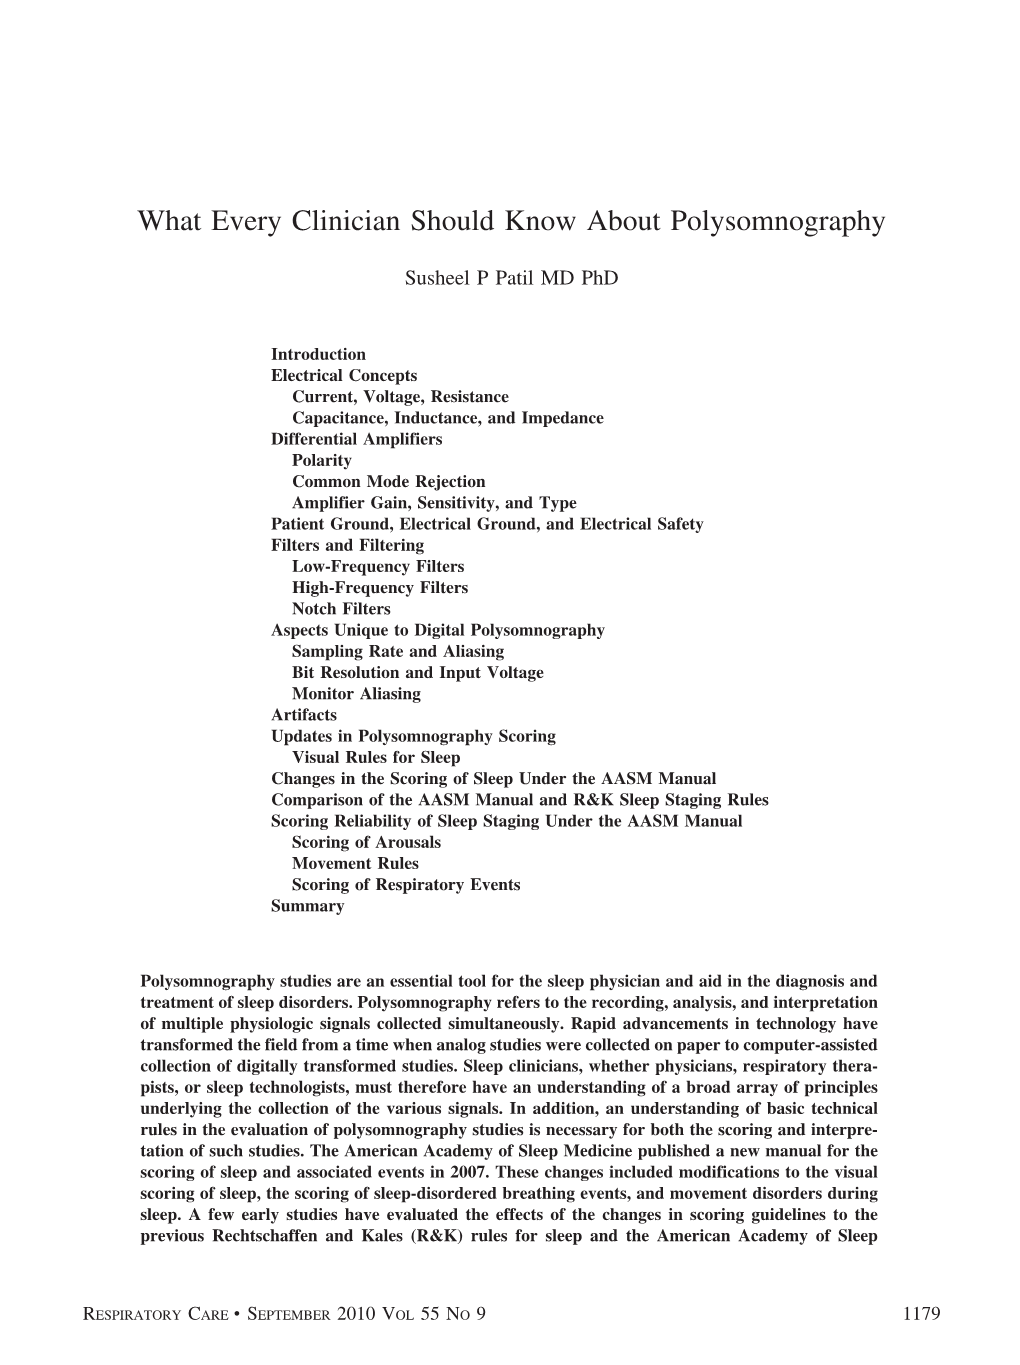 What Every Clinician Should Know About Polysomnography